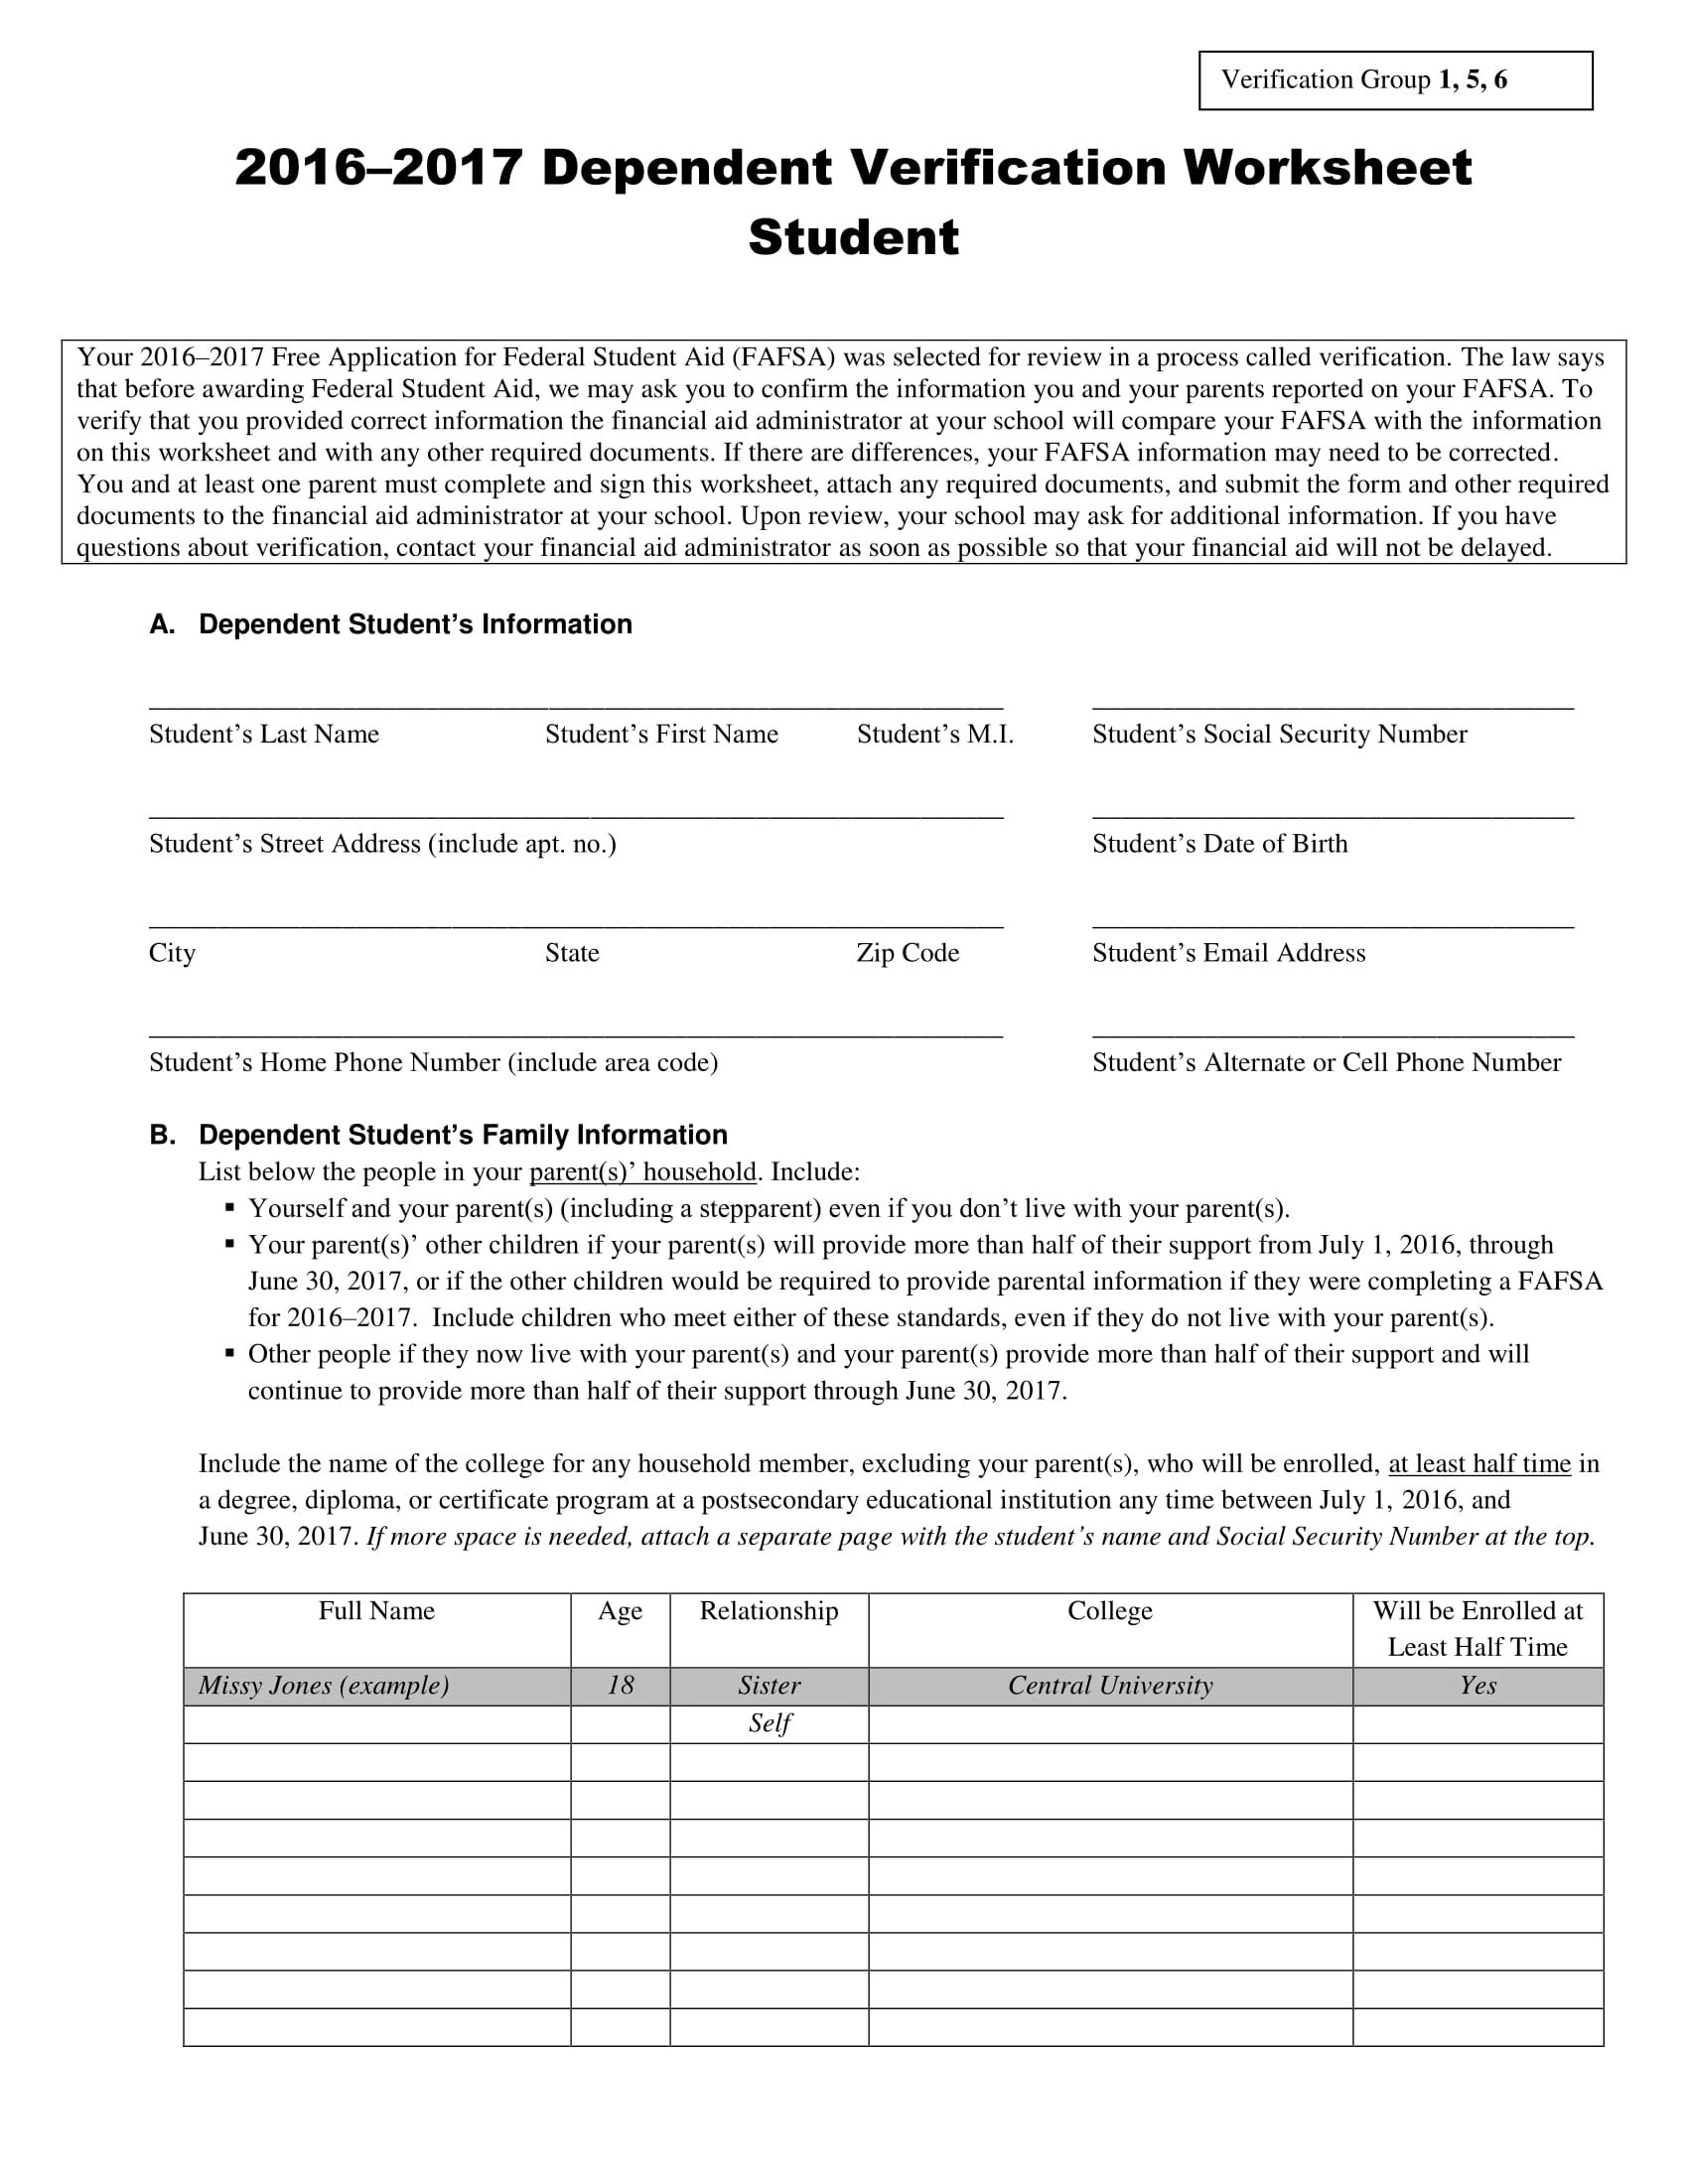 7 Steps In Filling Out A Dependent Verification Form Also 2017 2018 Verification Worksheet